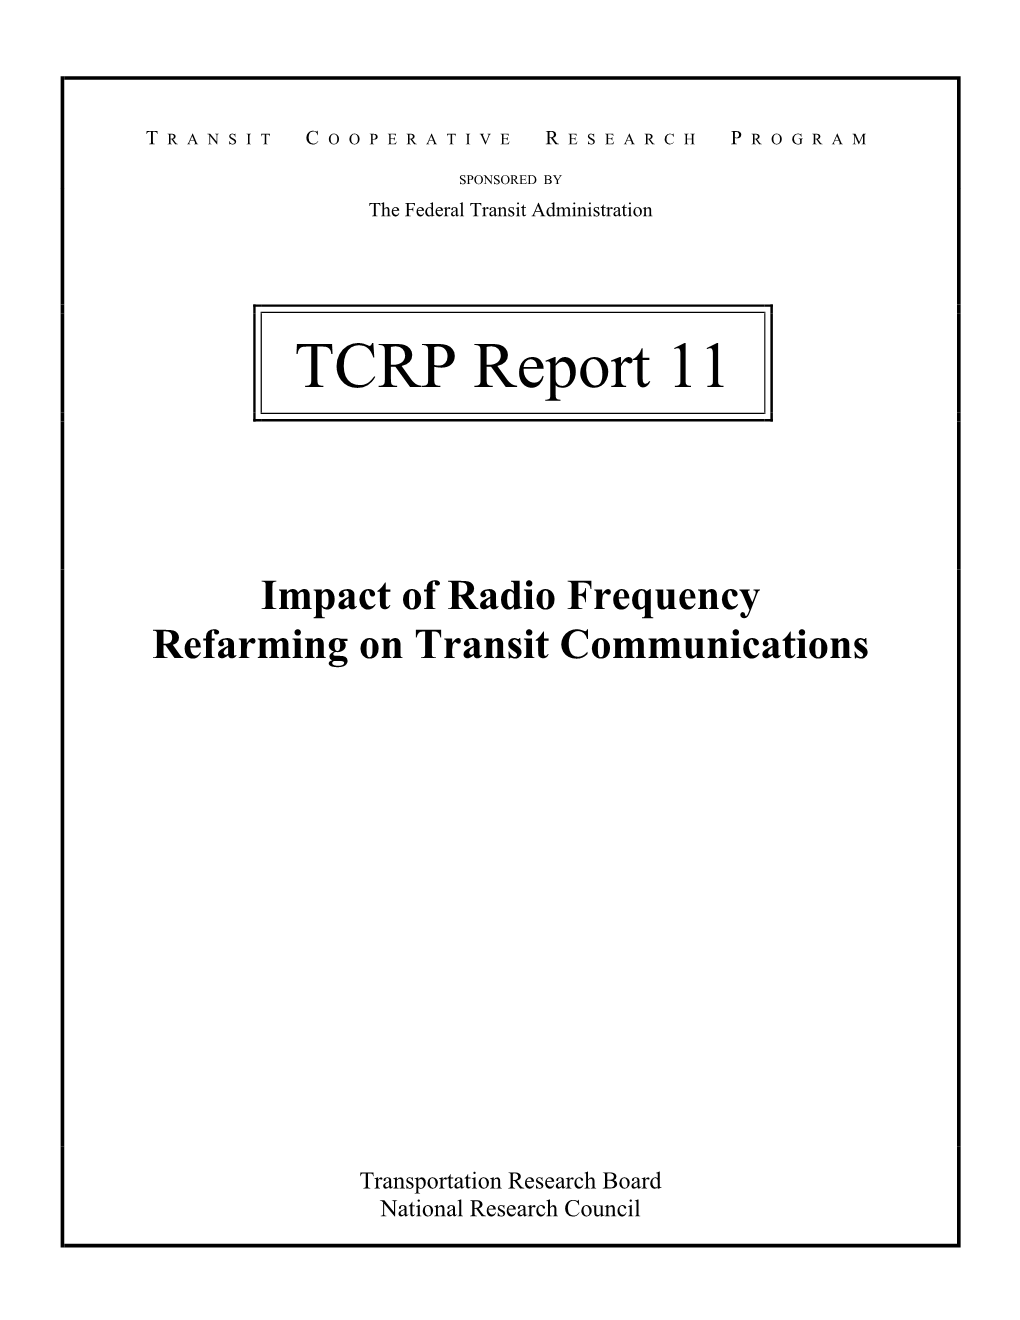 TCRP Report 11: Impact of Radio Frequency Refarming on Transit